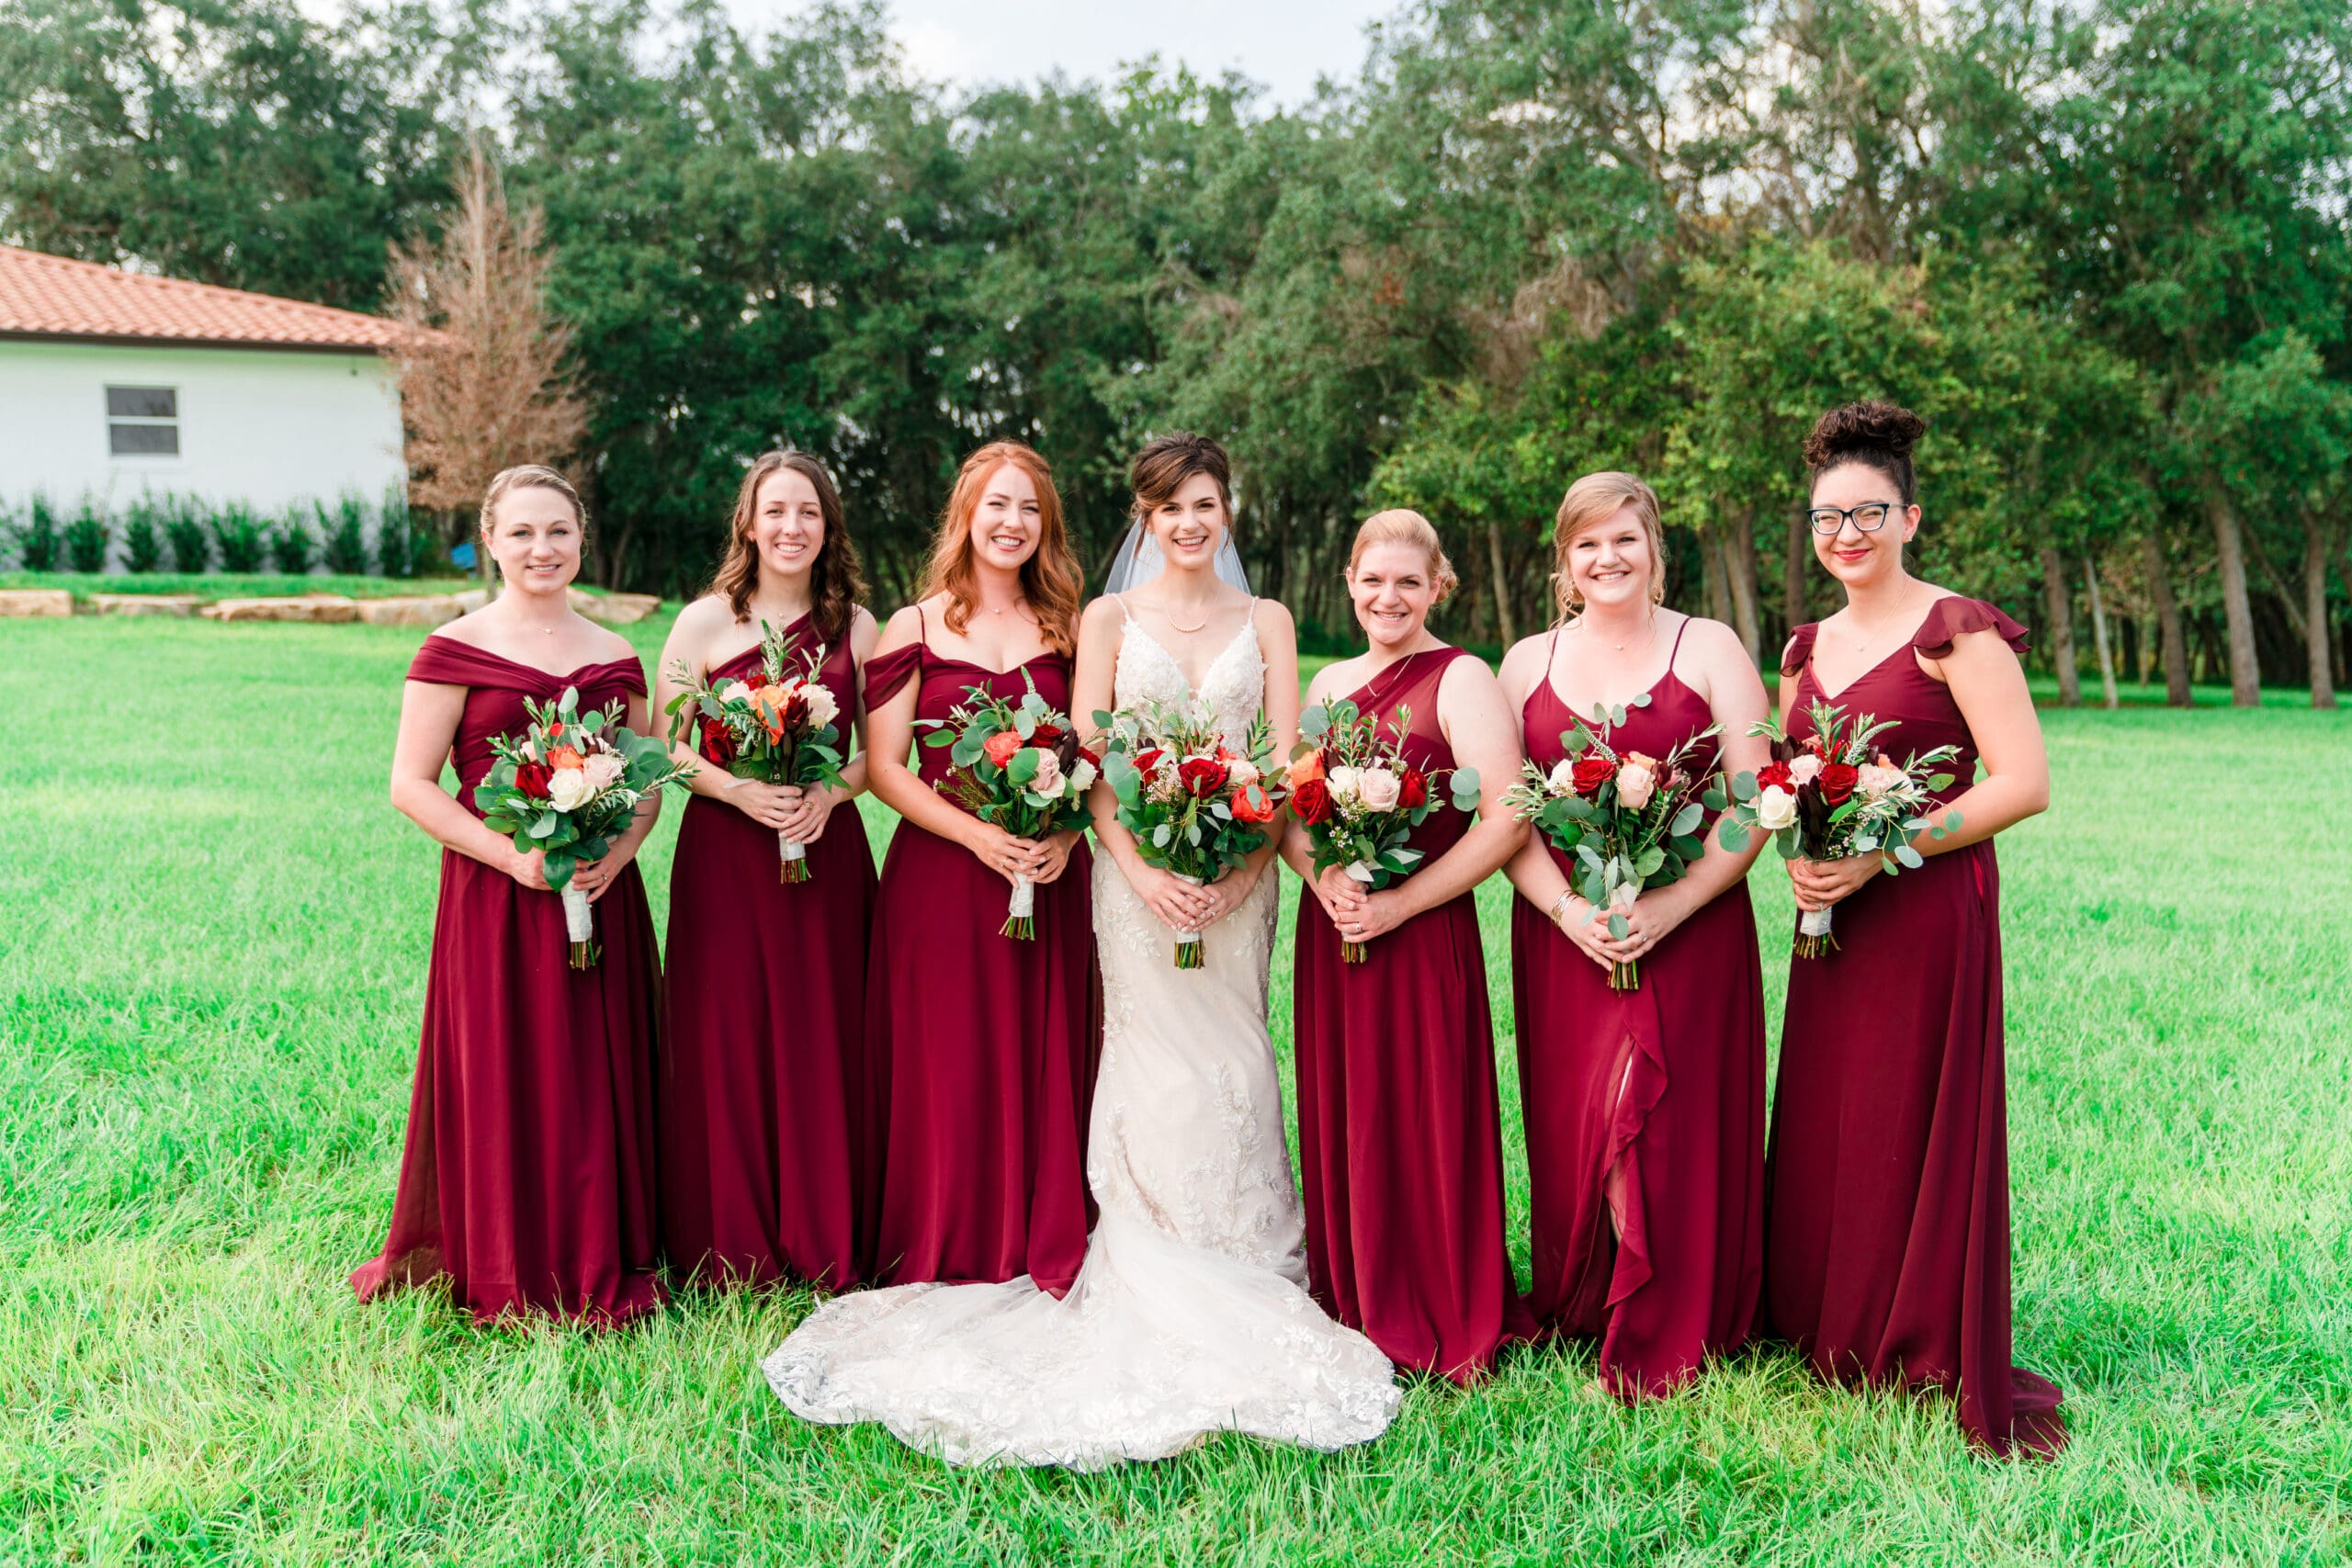 Bethany and her bridesmaids holding flowers in the Sterling Event Venue Garden.